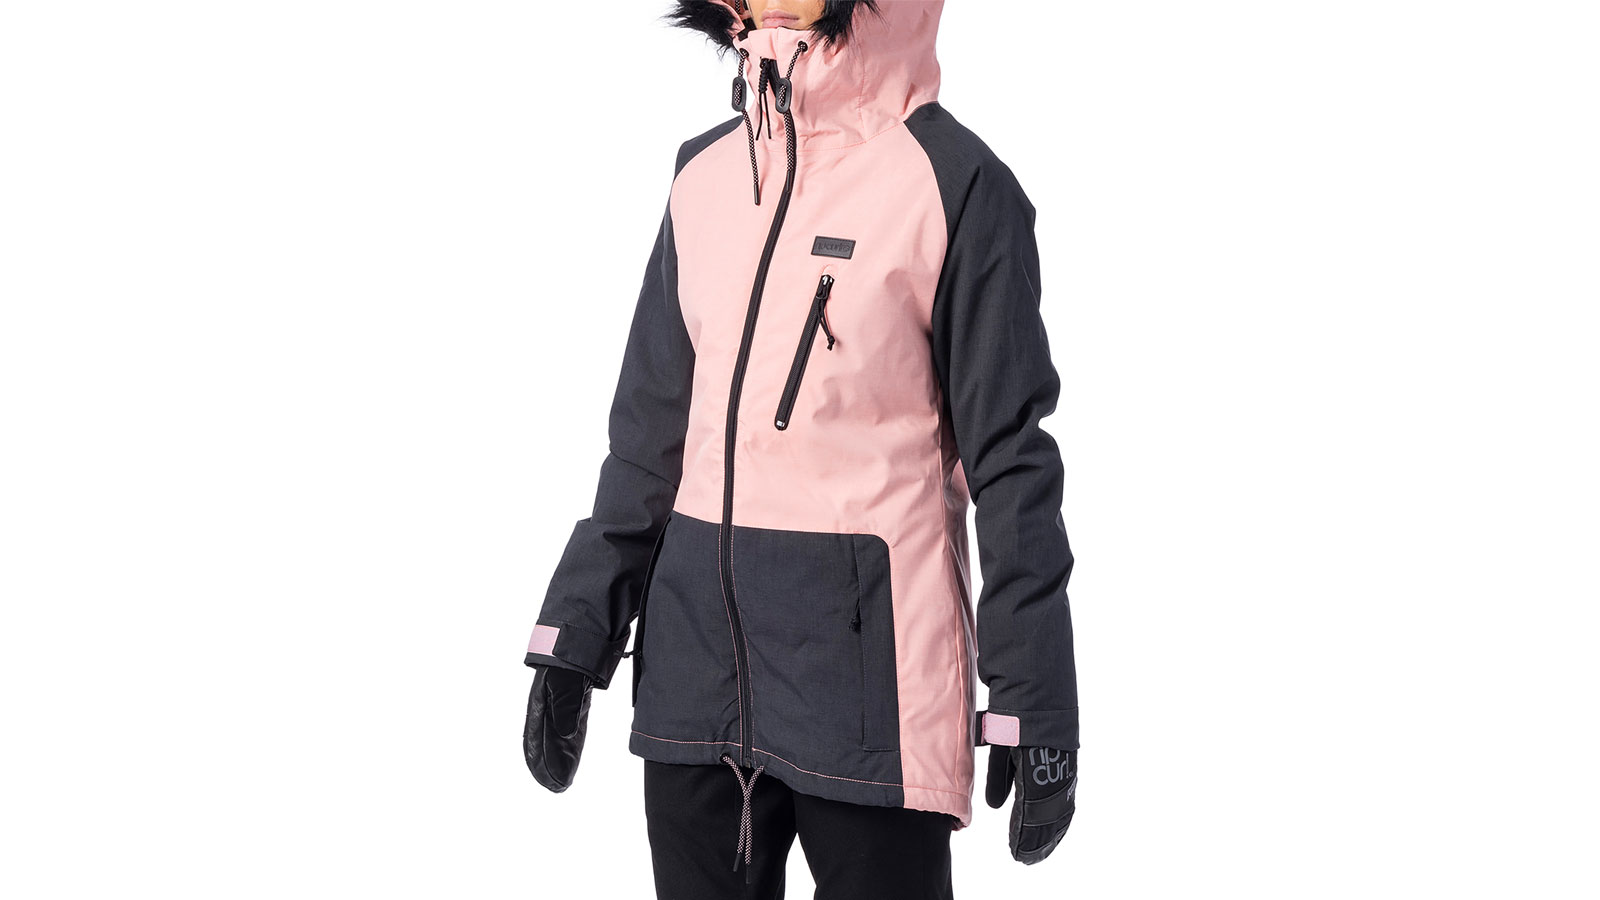 RIPCURL-SNOW-OUTERWEAR-JACKET-FW-19-20